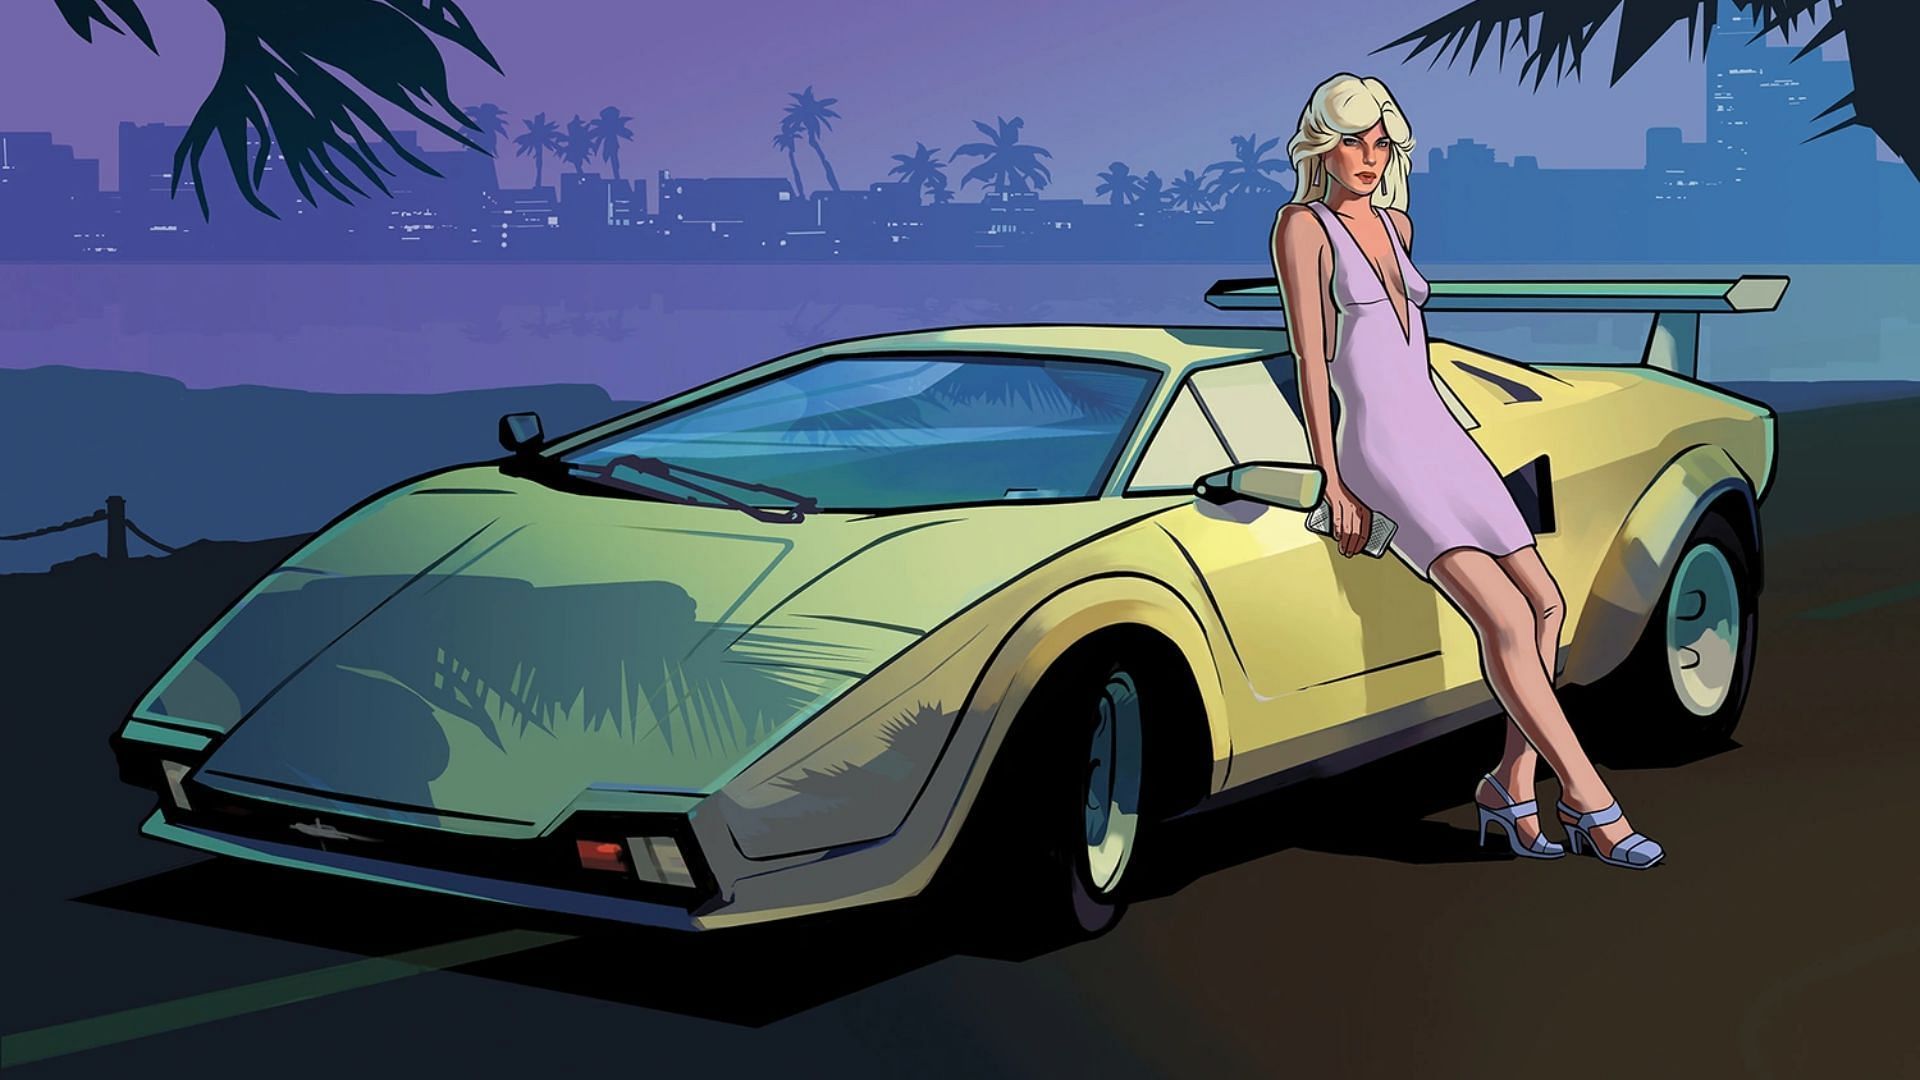 The Vice City games oozes 80s vibes (Image via Rockstar Games)